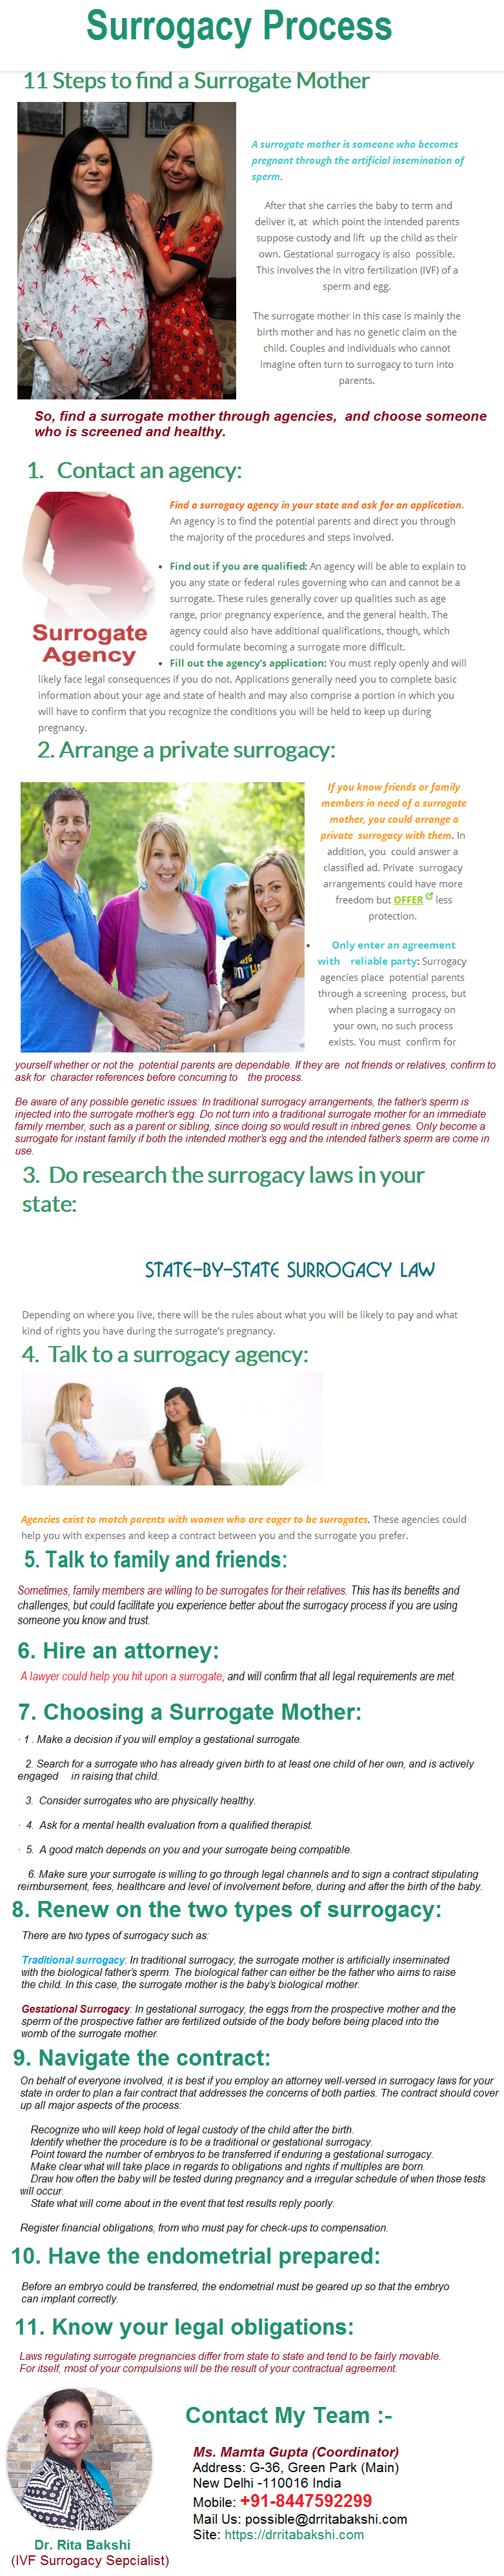 Know About Surrogacy Procedure In India Visually 